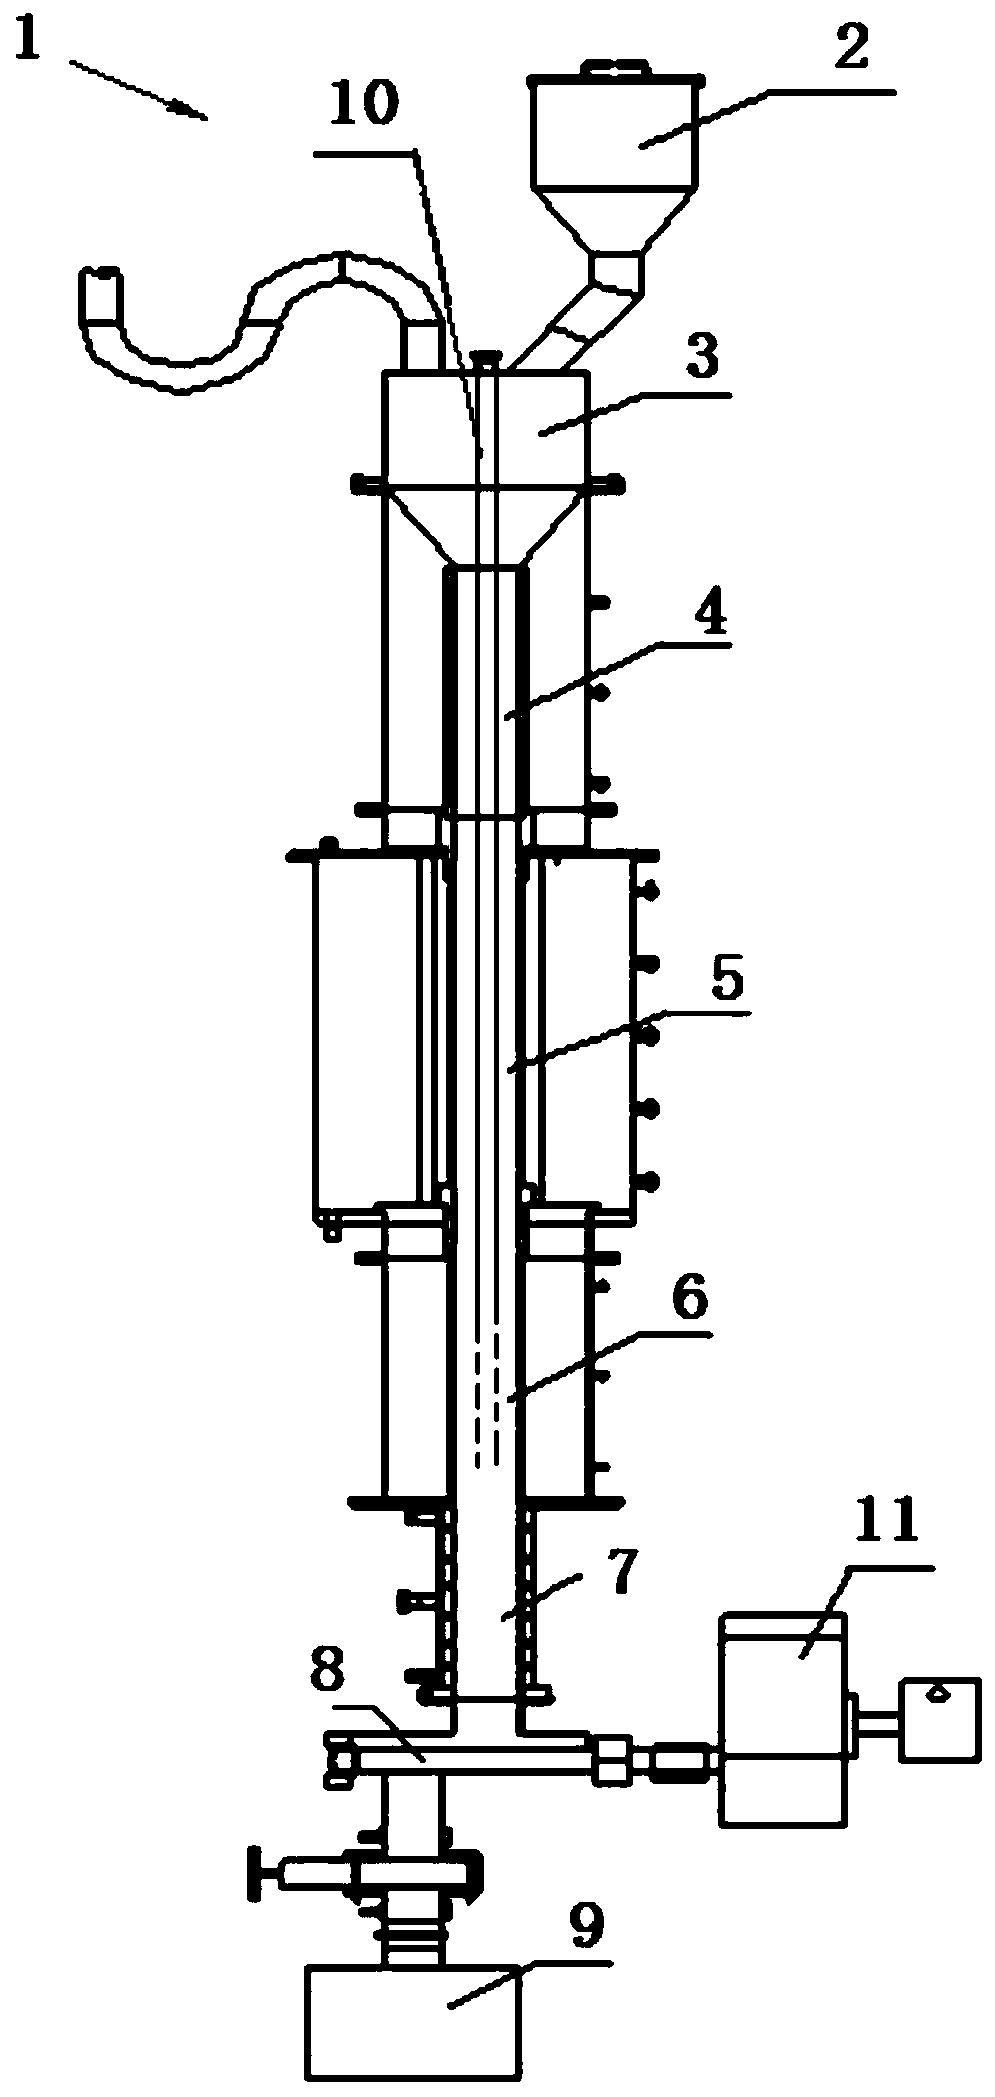 A method and device for producing direct reduced iron